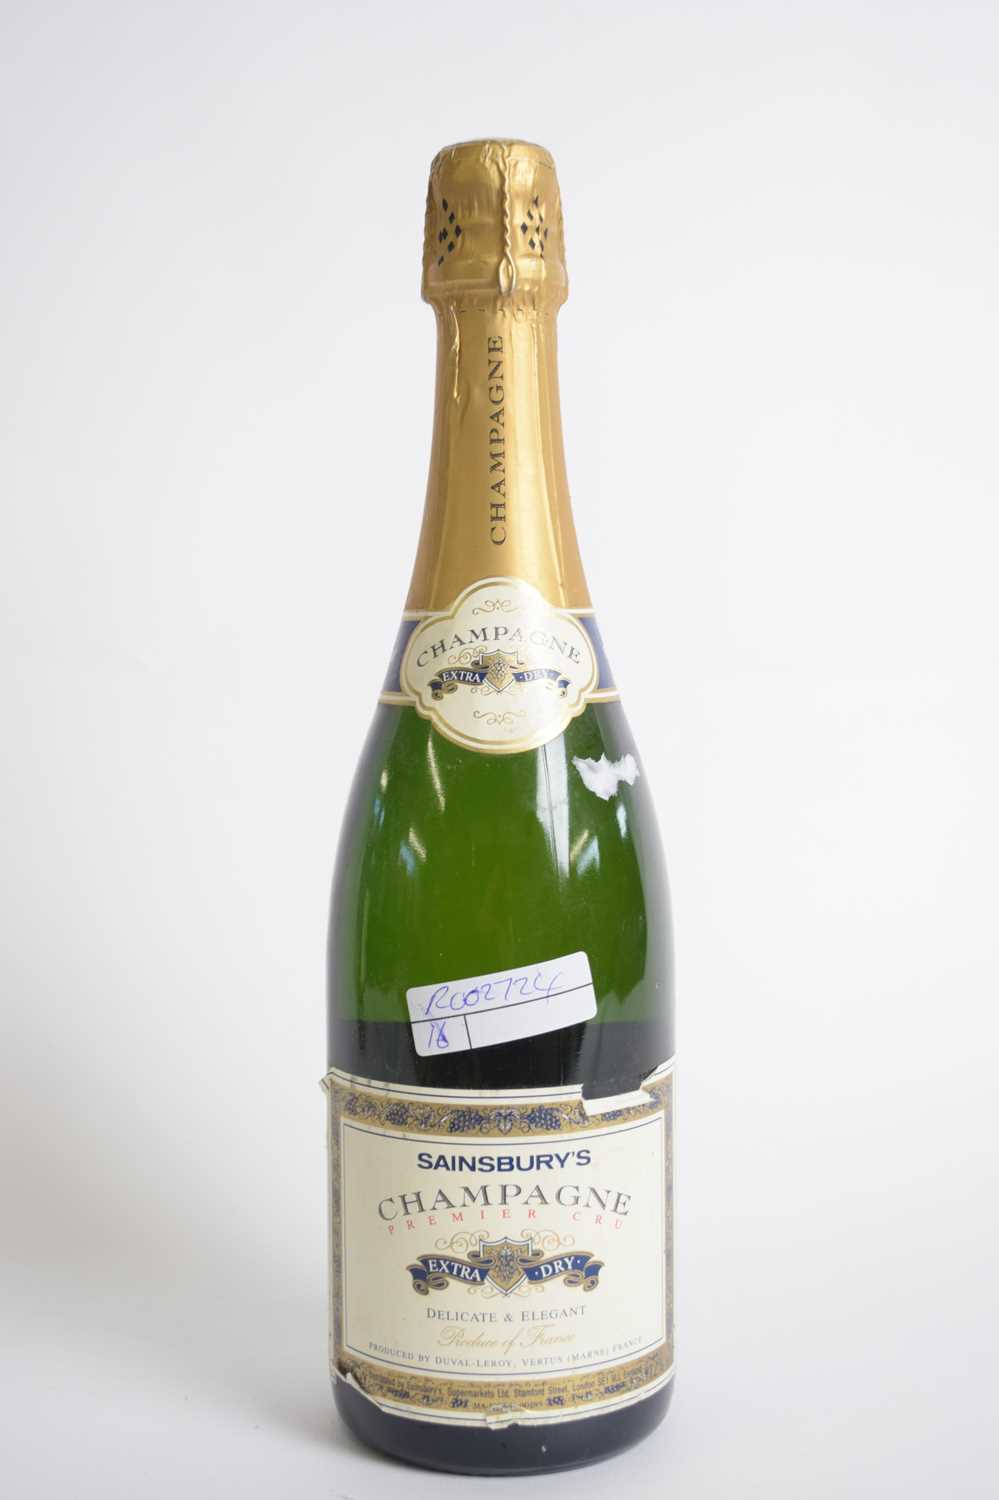 One bottle Sainsbury's Champagne Premier Cru, 75cl - Image 3 of 3